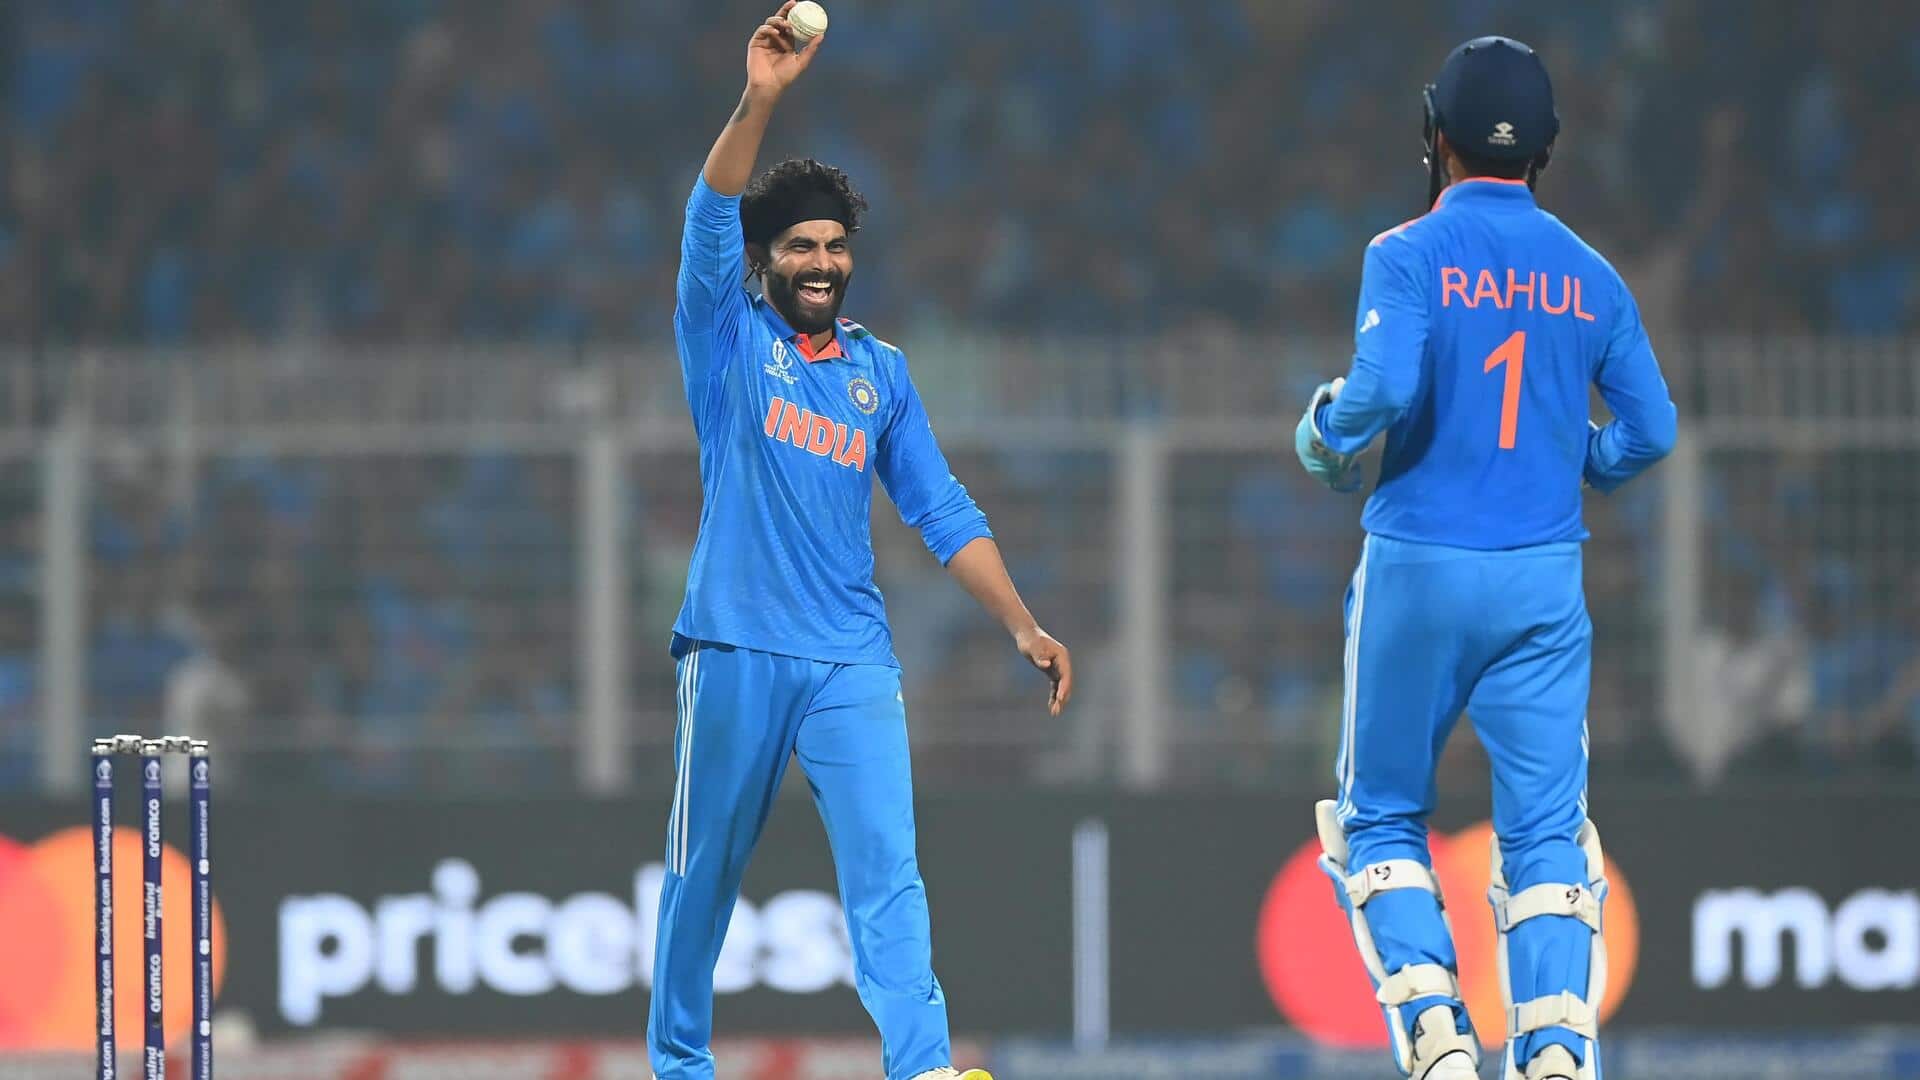 Ravindra Jadeja becomes second Indian spinner with a WC fifer